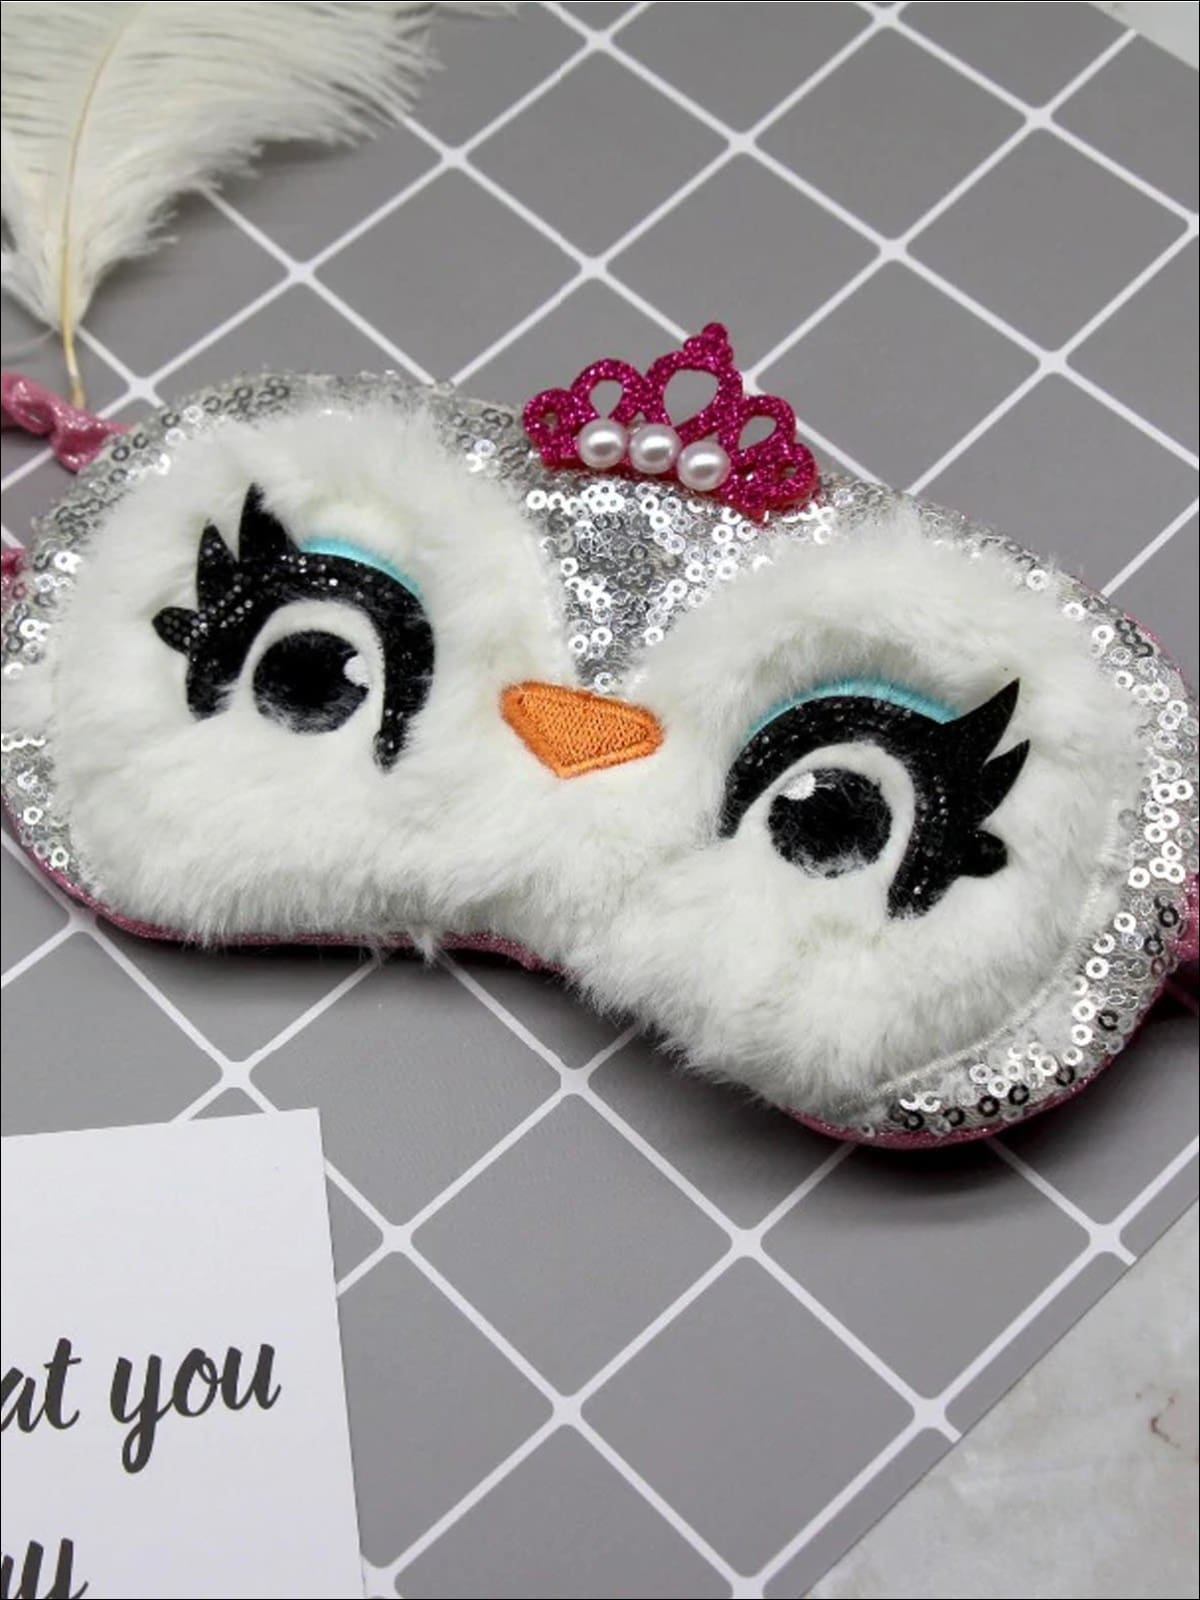 Girls Sequined Plush Owl With Crown Eye Mask - White - Girls Accessories